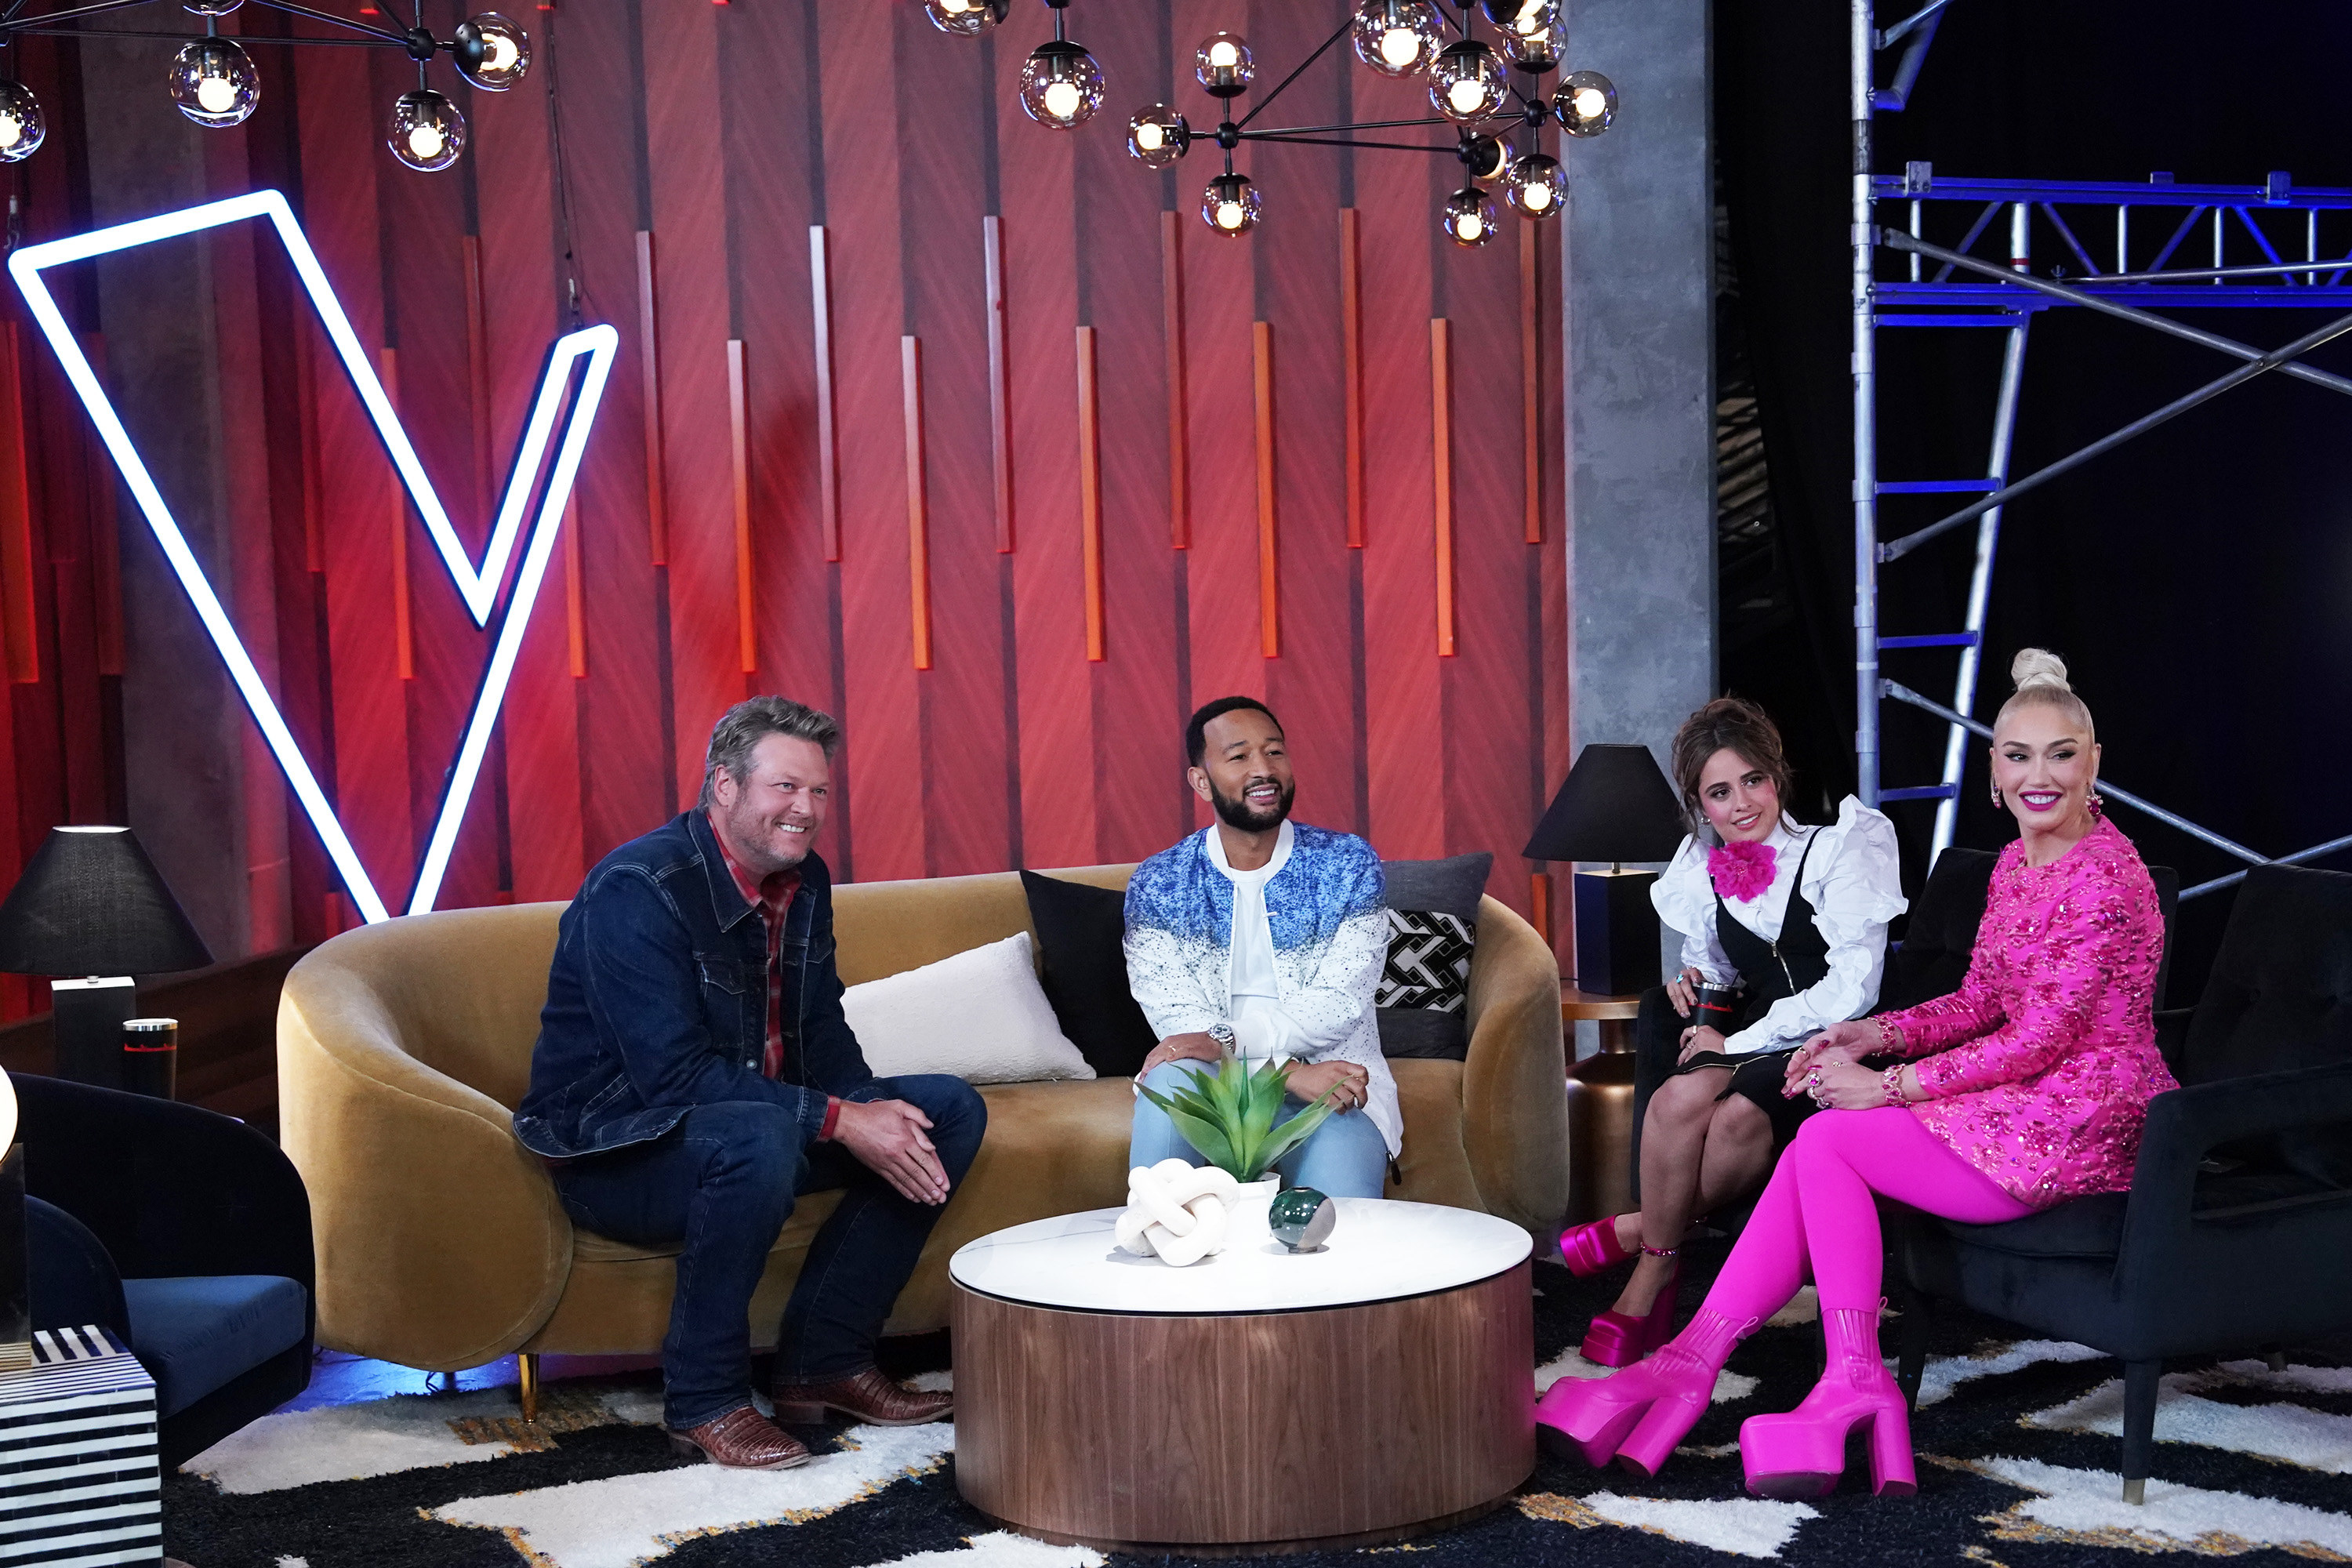 The Voice judges sitting on couches together